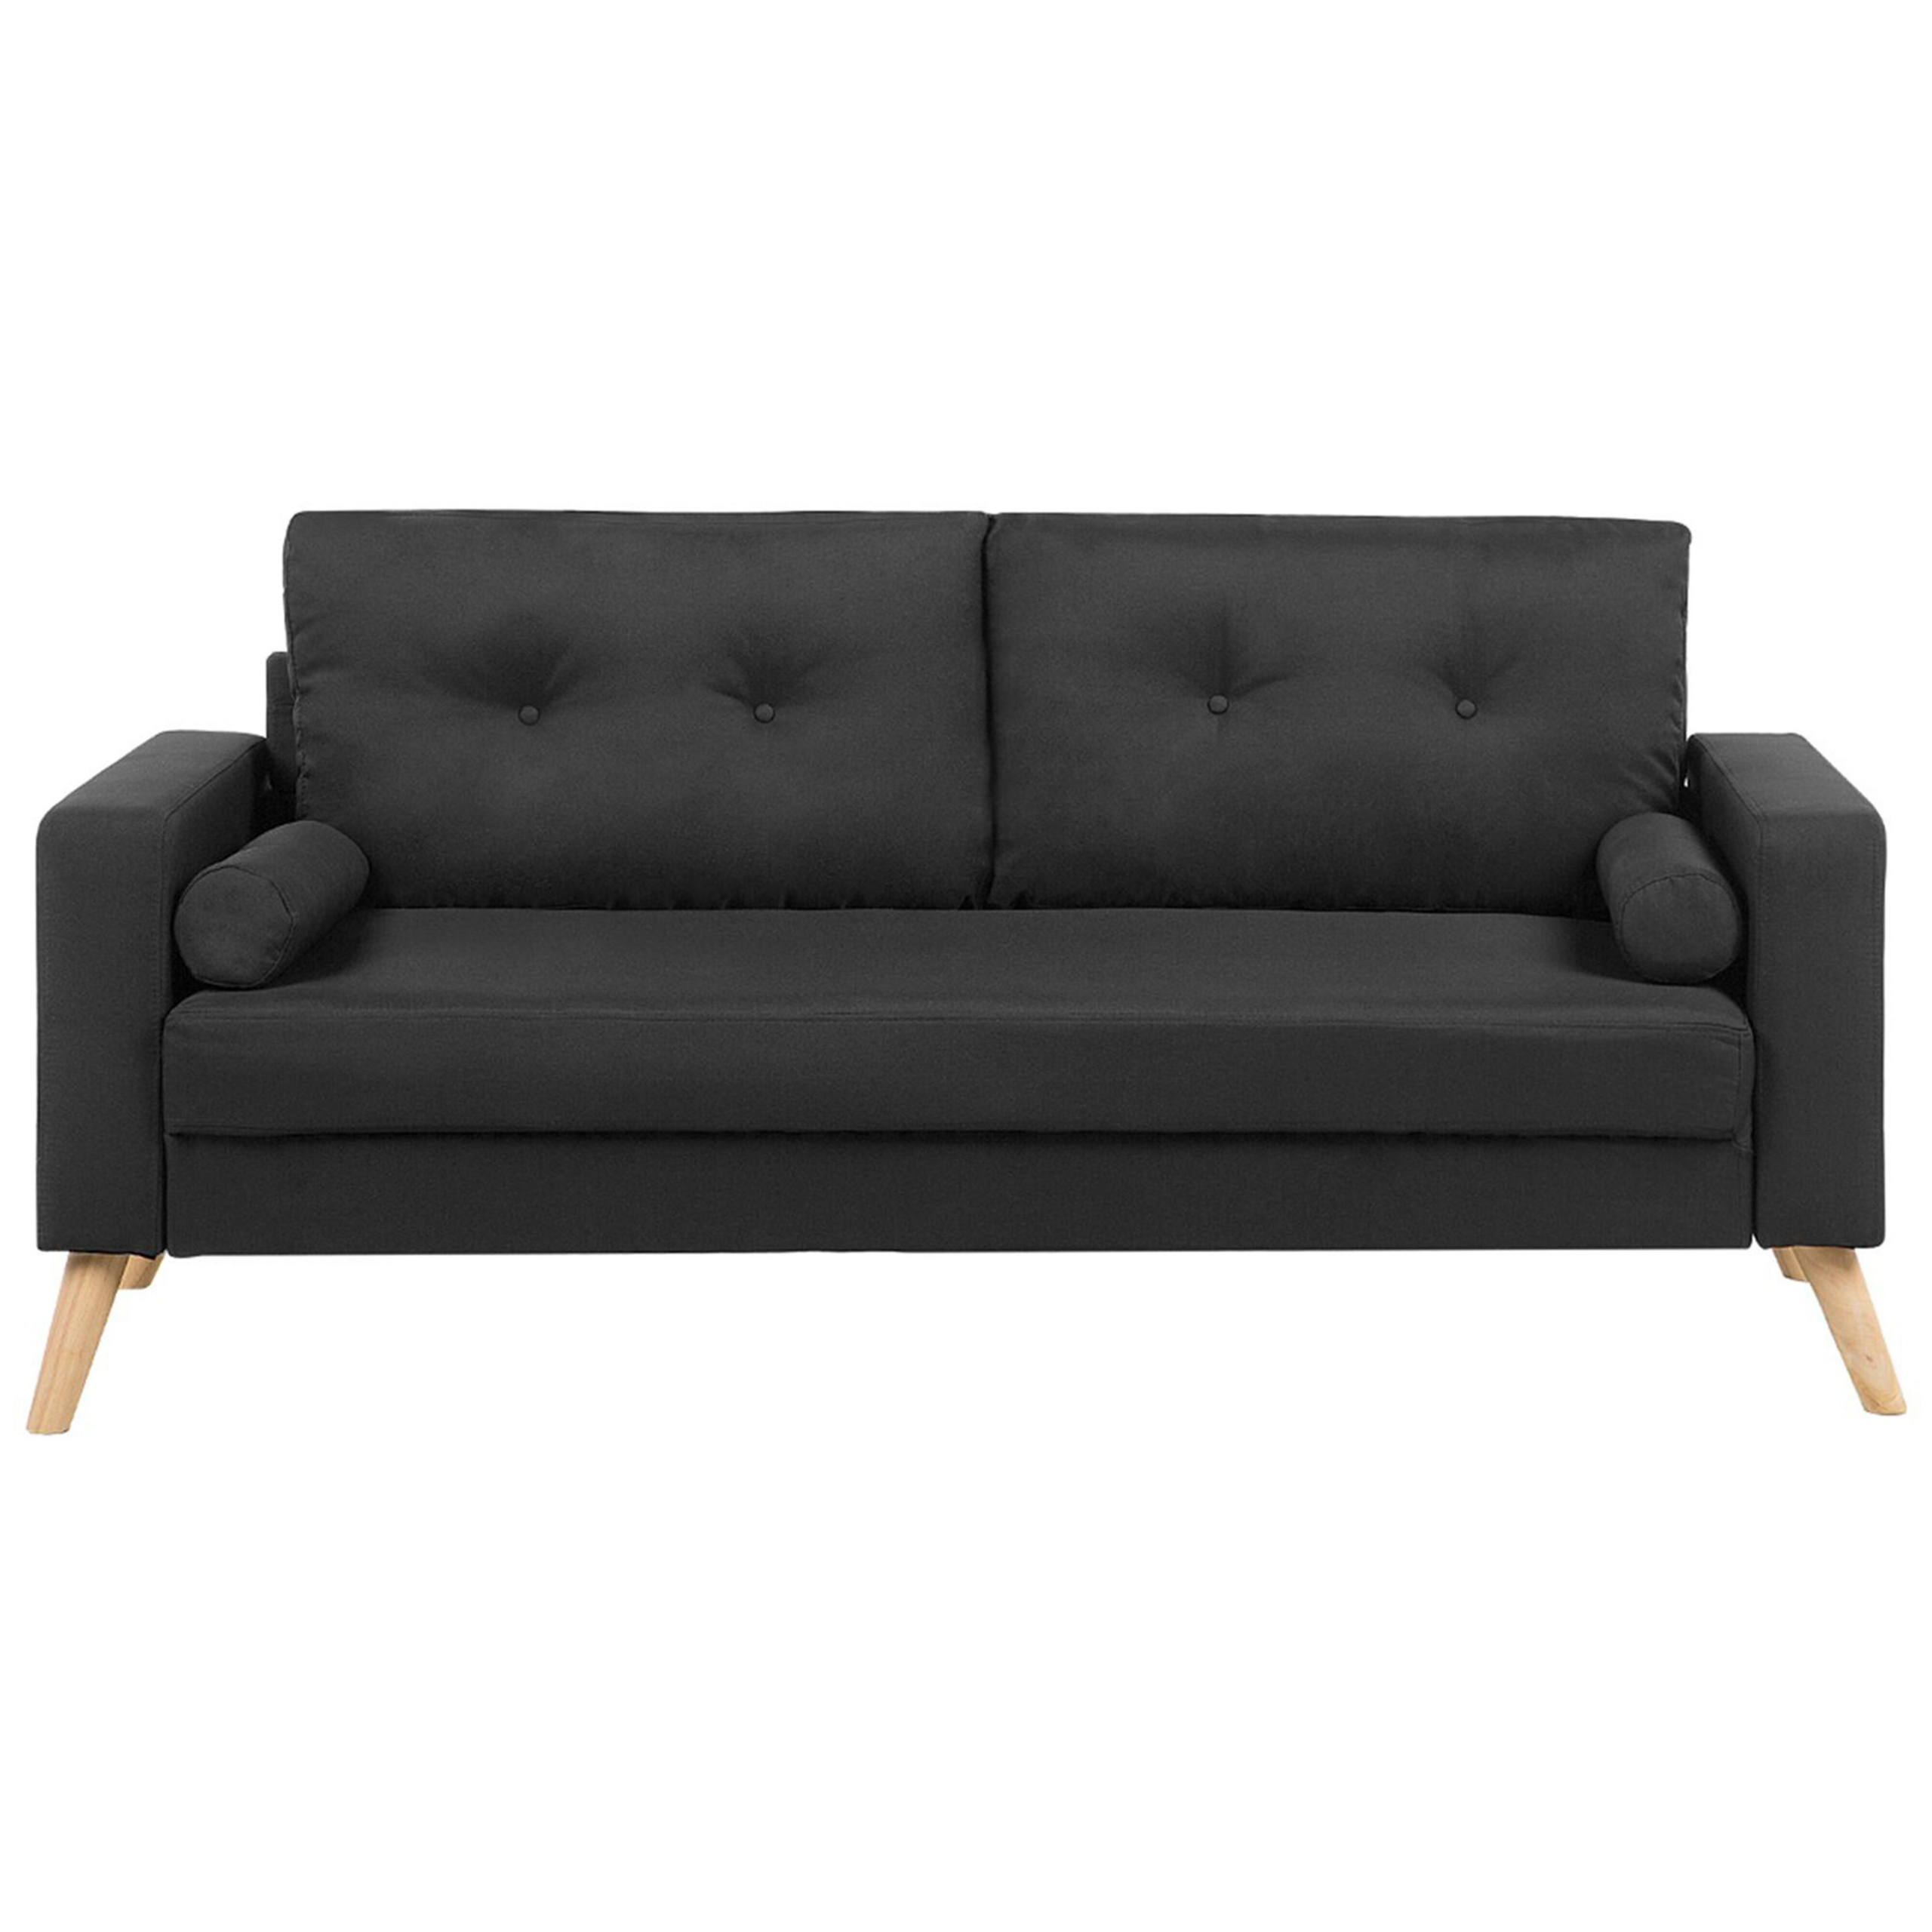 Beliani Fabric Sofa Black Fabric Upholstery 2 Seater Button Tufted with Two Bolsters